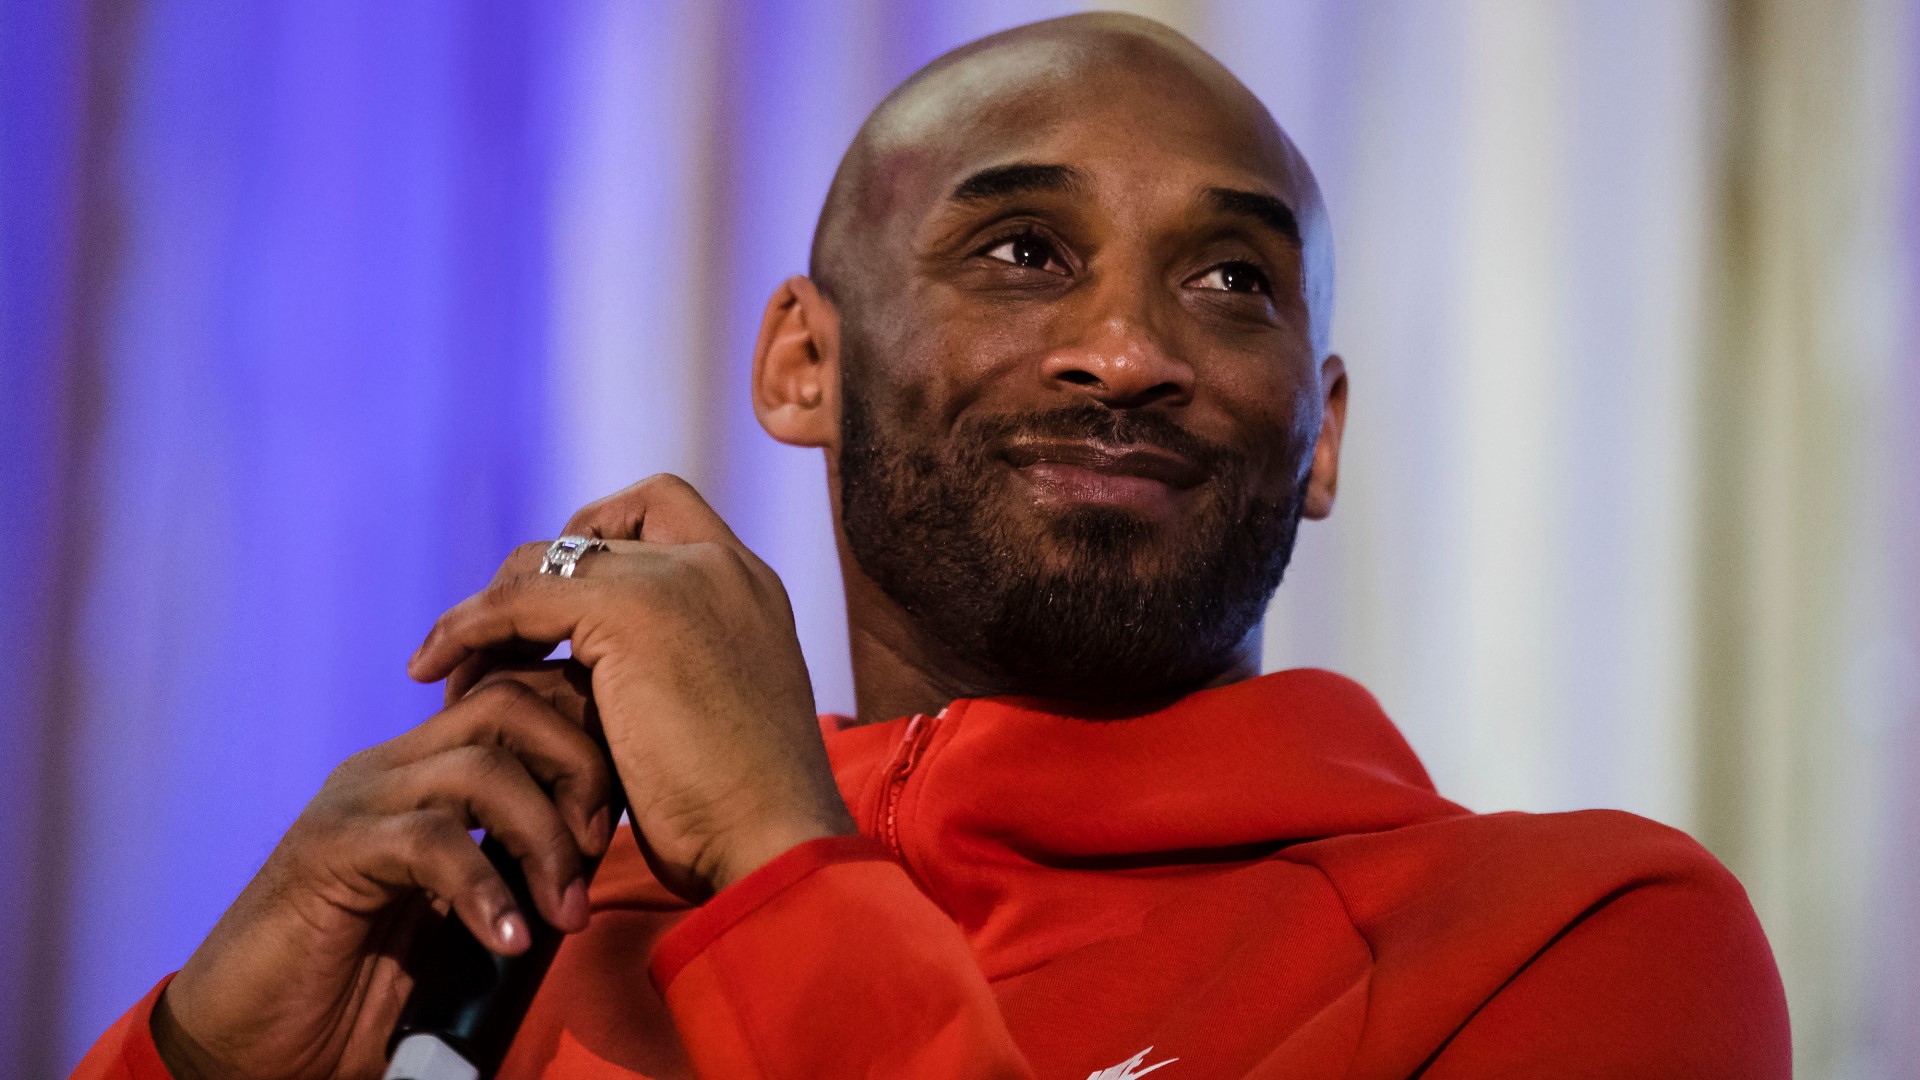 Kobe Bryant may have been a rival player for Los Angeles Lakers for his NBA career, but his contributions to the game exceeded the rivalries on the court.